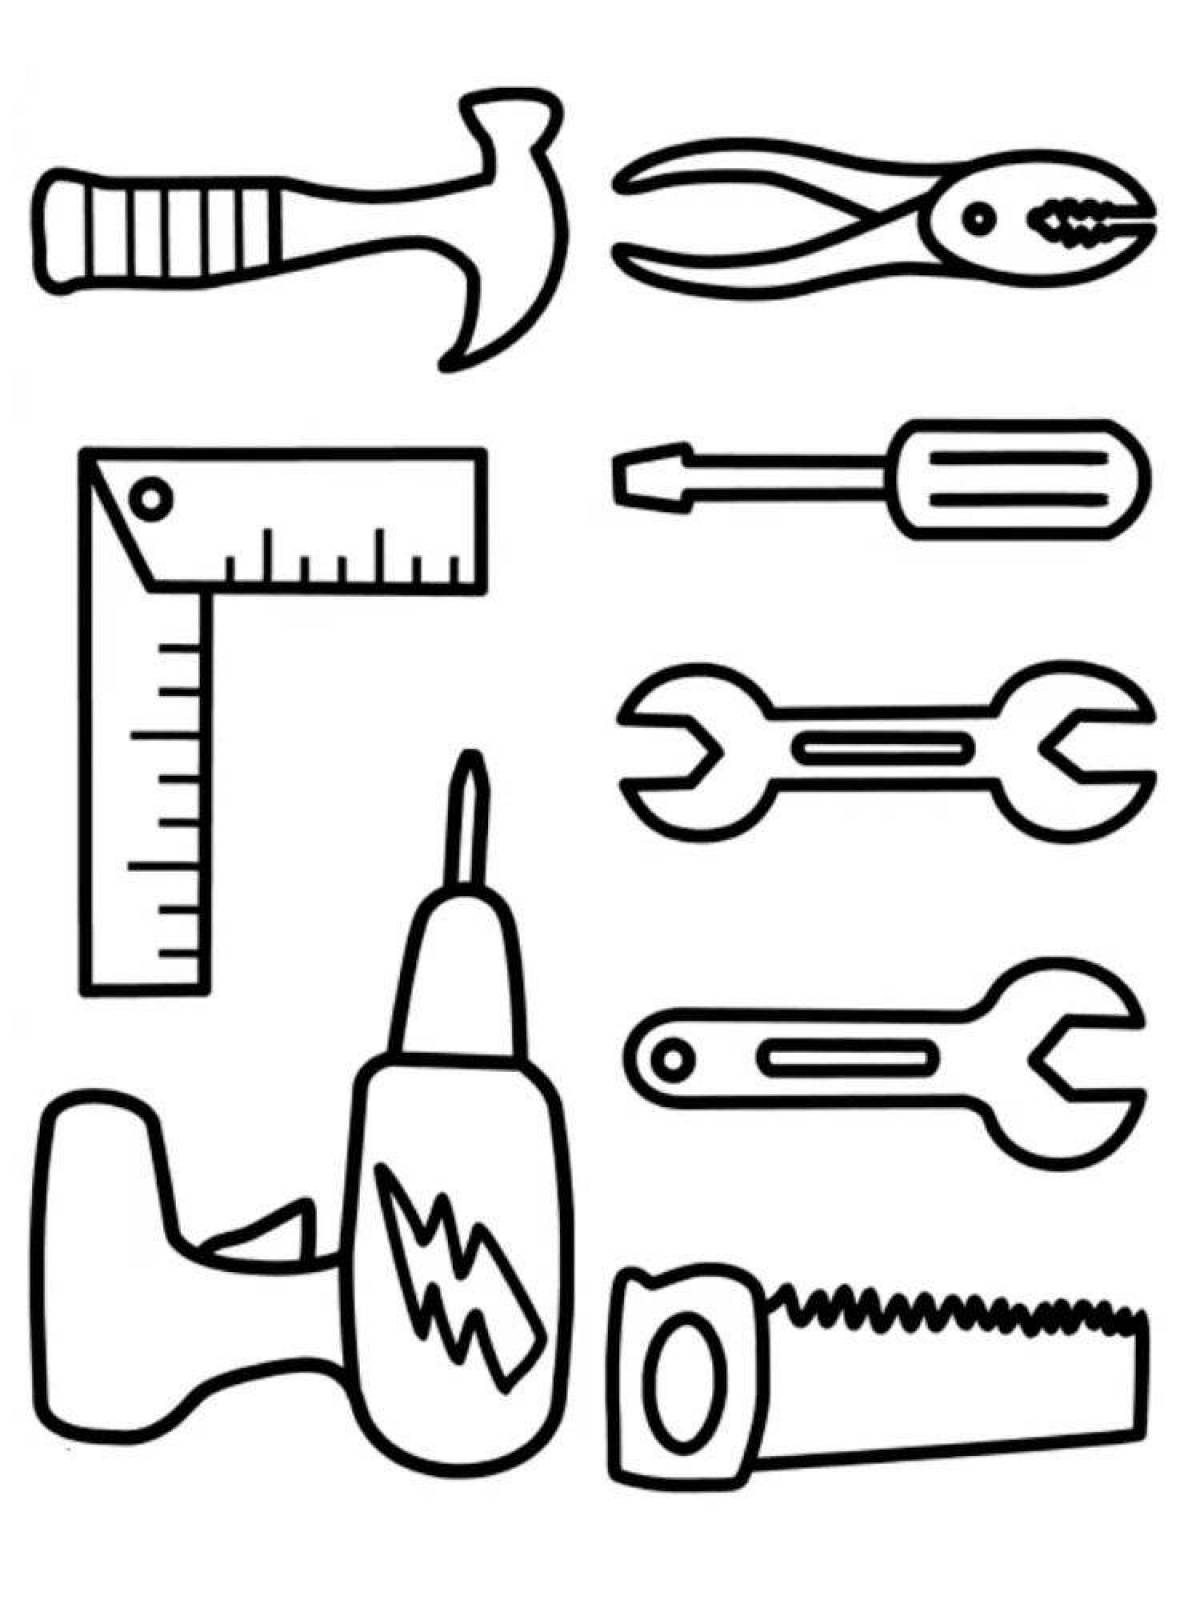 Exciting tool coloring page for kids